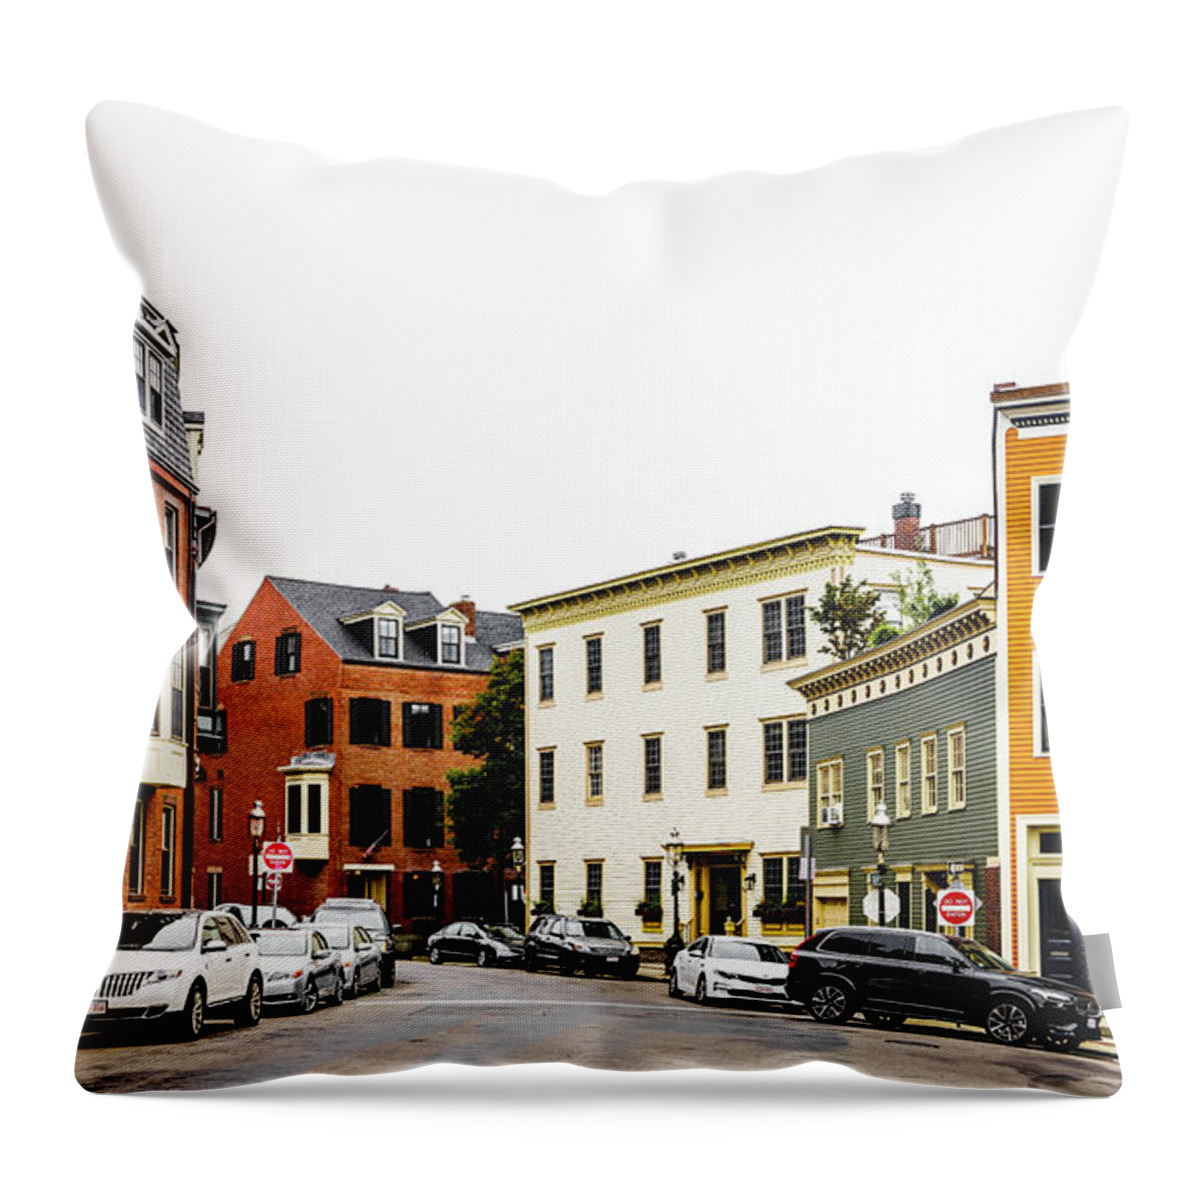 America Throw Pillow featuring the photograph Historic Boston by Alexey Stiop